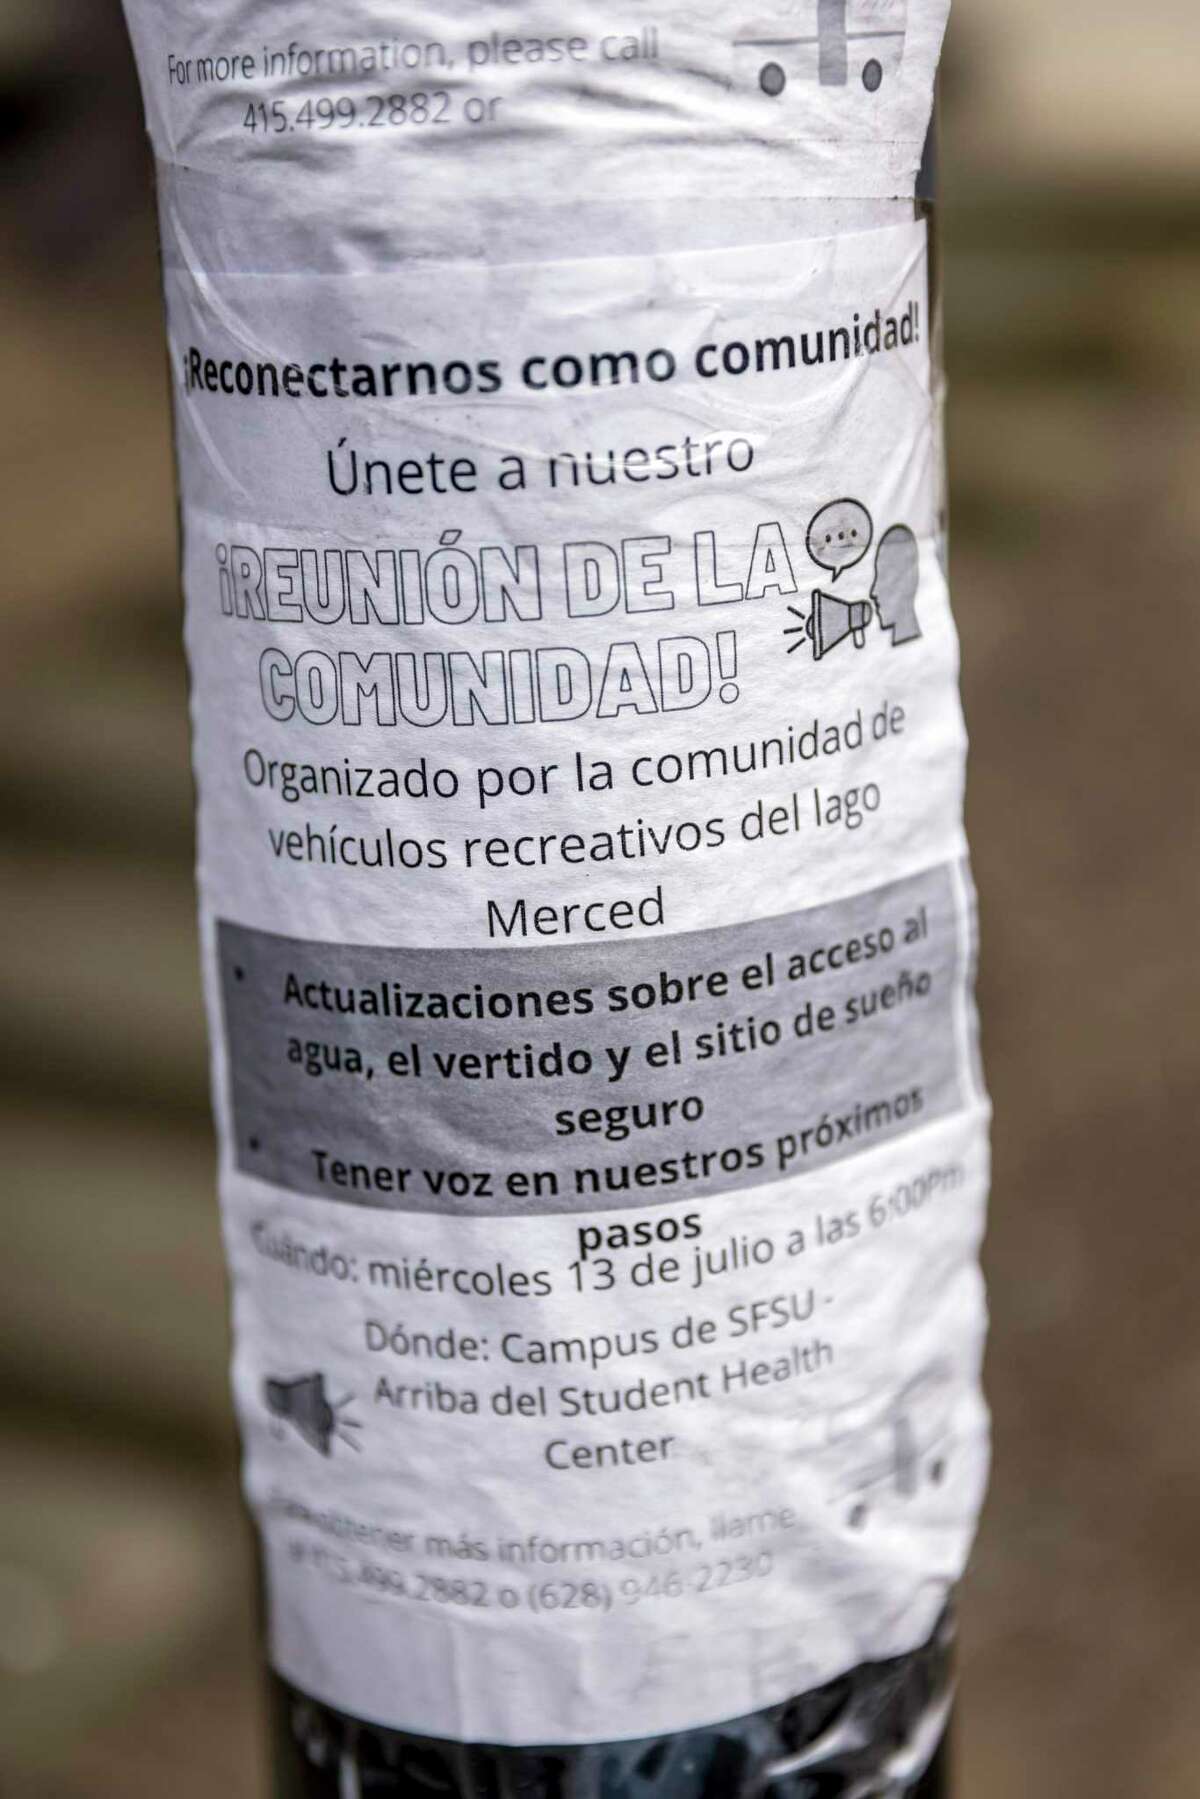 A flyer in Spanish is addressed to members of the RV community along Lake Merced in San Francisco.